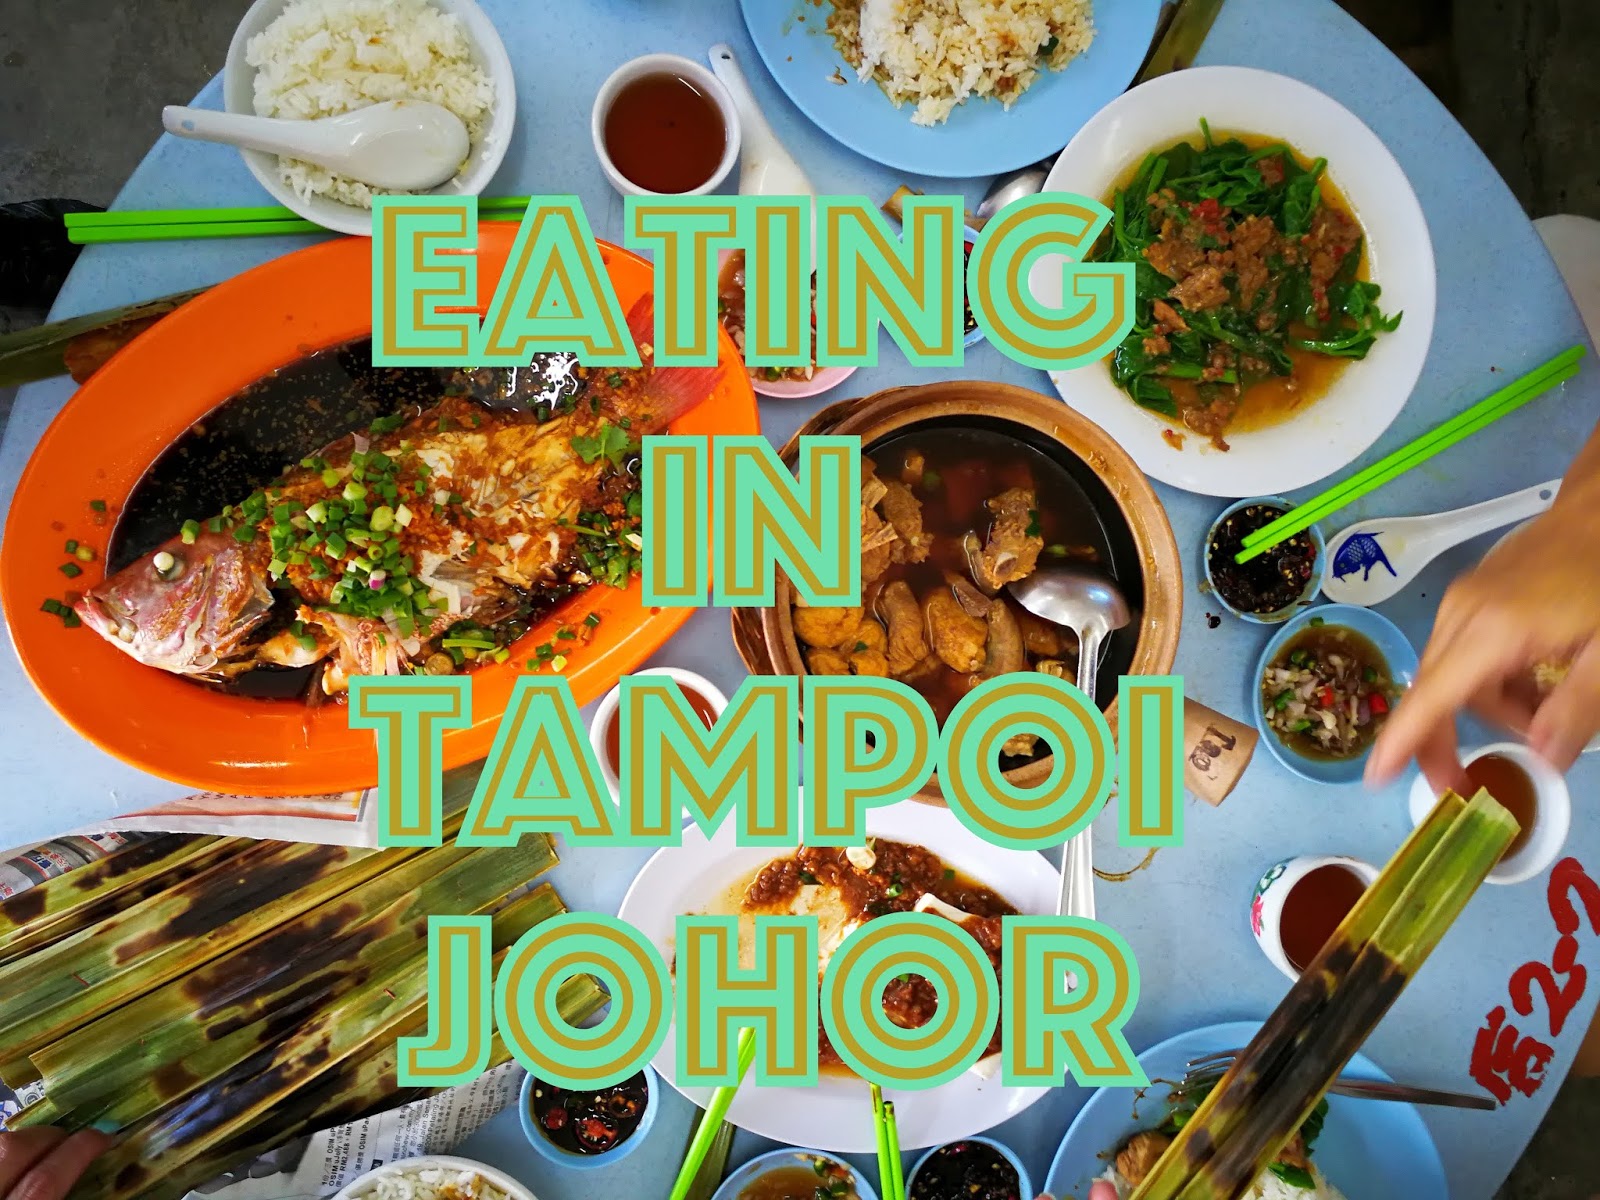 What to Eat in Tampoi, Johor Bahru? Plenty & Here's 10 of the Best